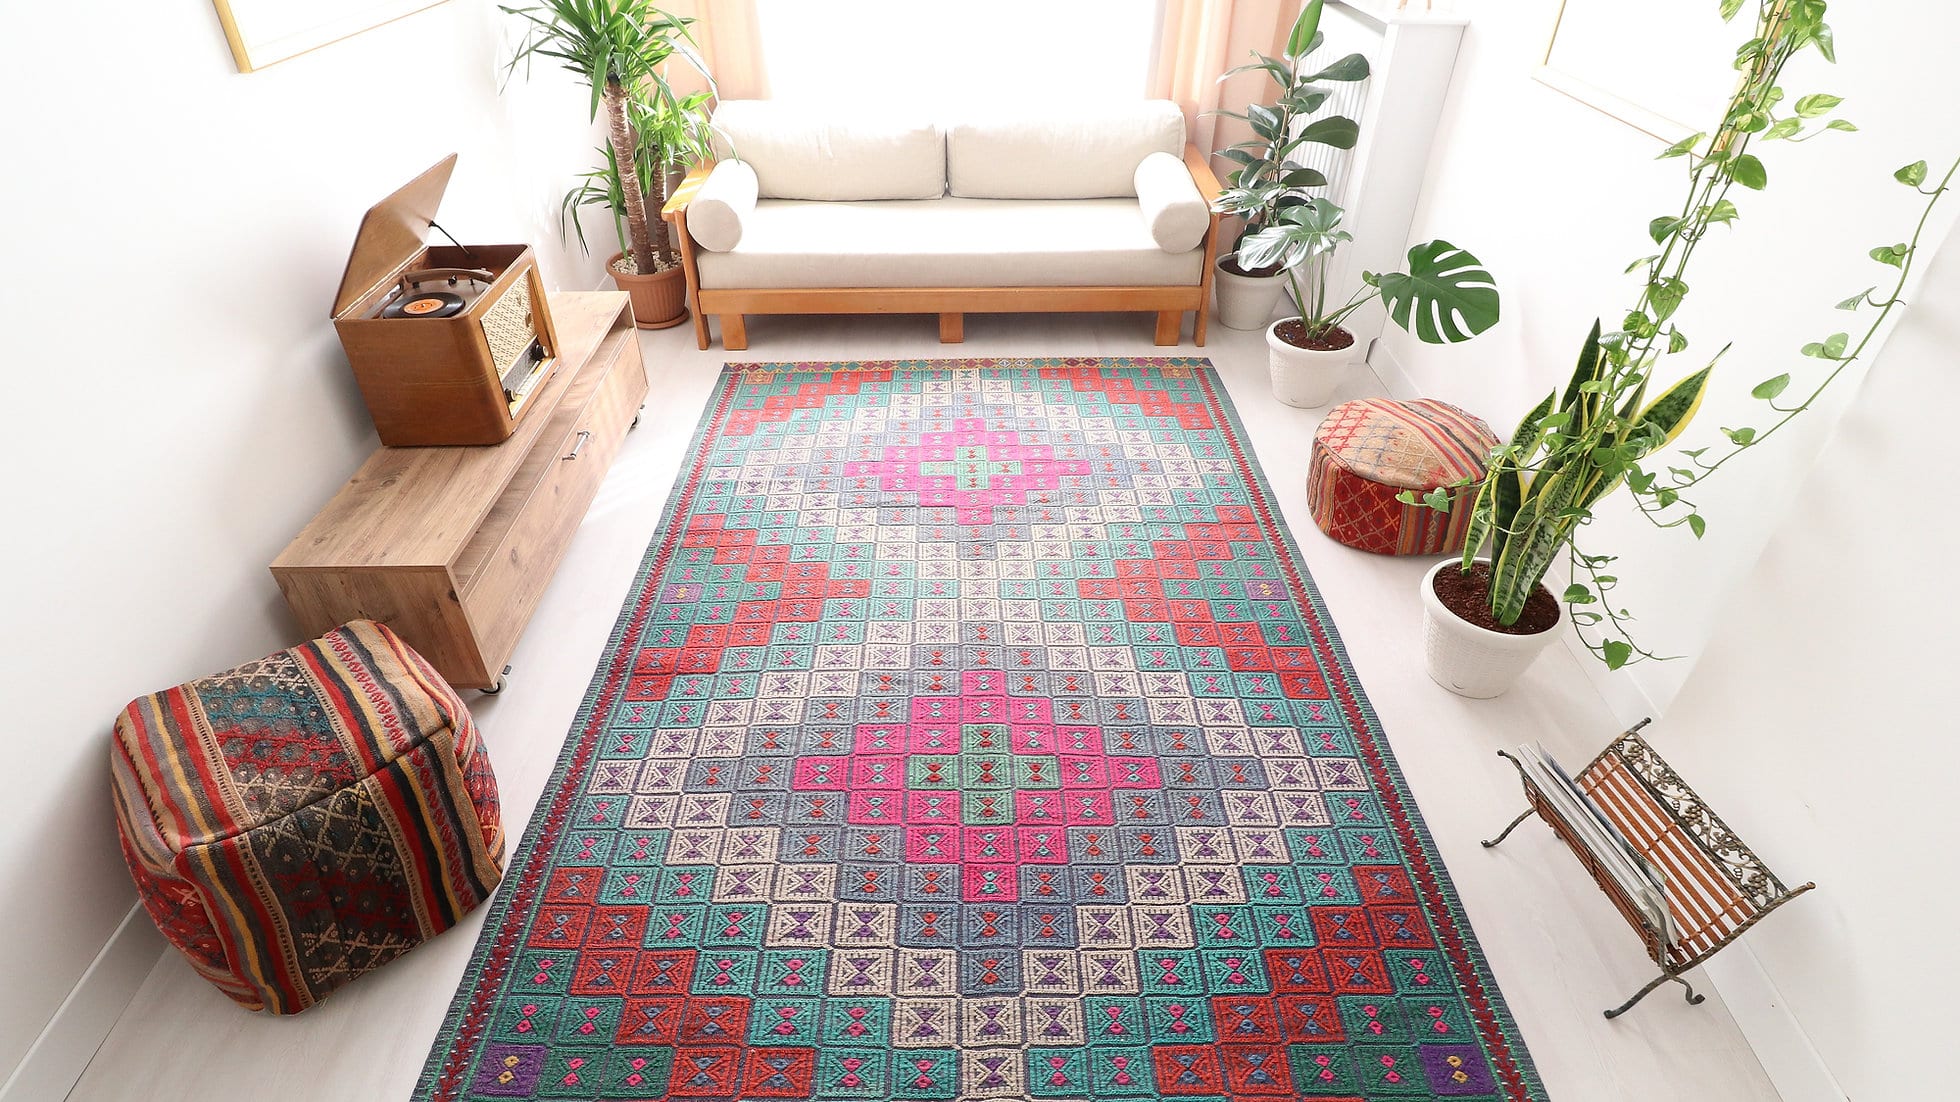 Vintage hand woven Cecim Kilim Rug with faded hues in pink, red and green